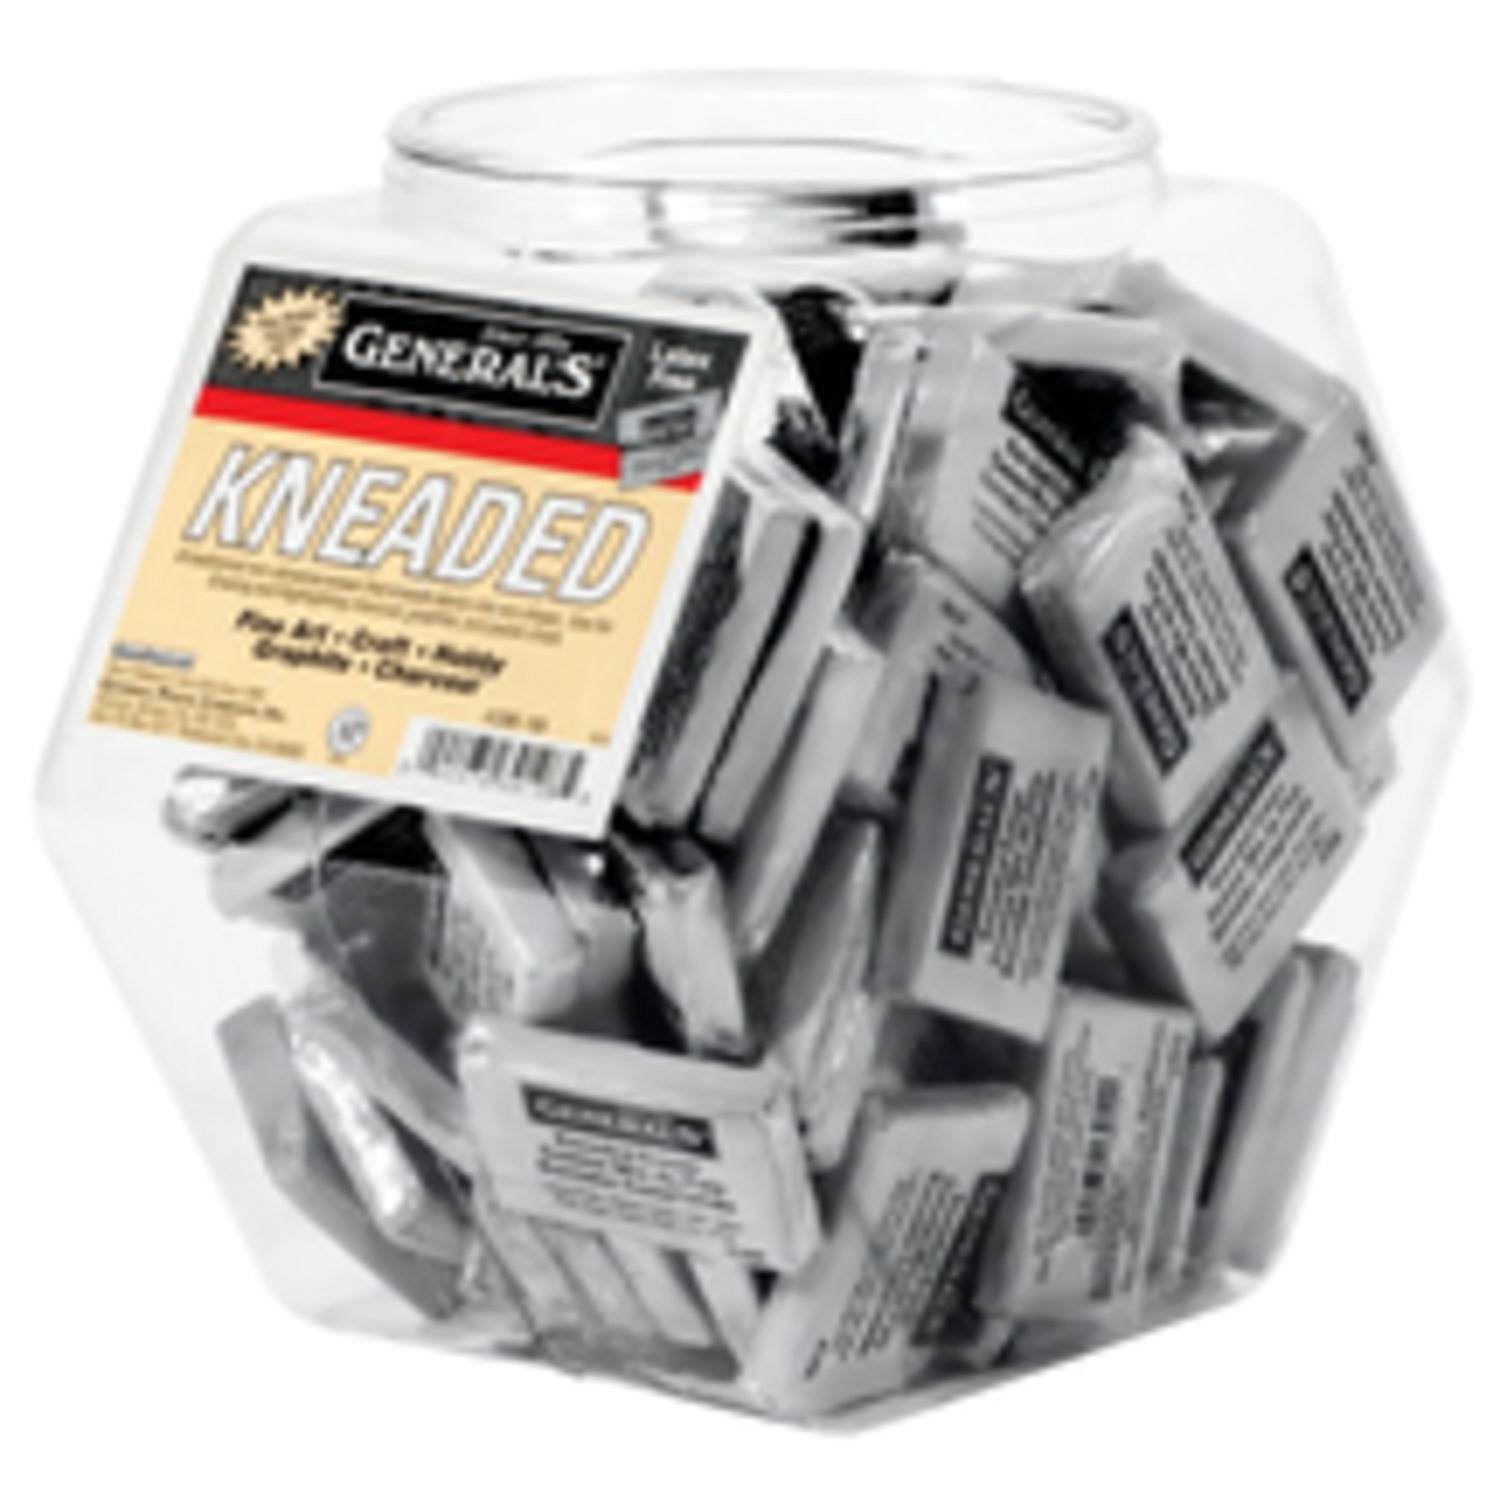 General Pencil Kneaded Erasers 108-Count Display Tub, Size: One Size